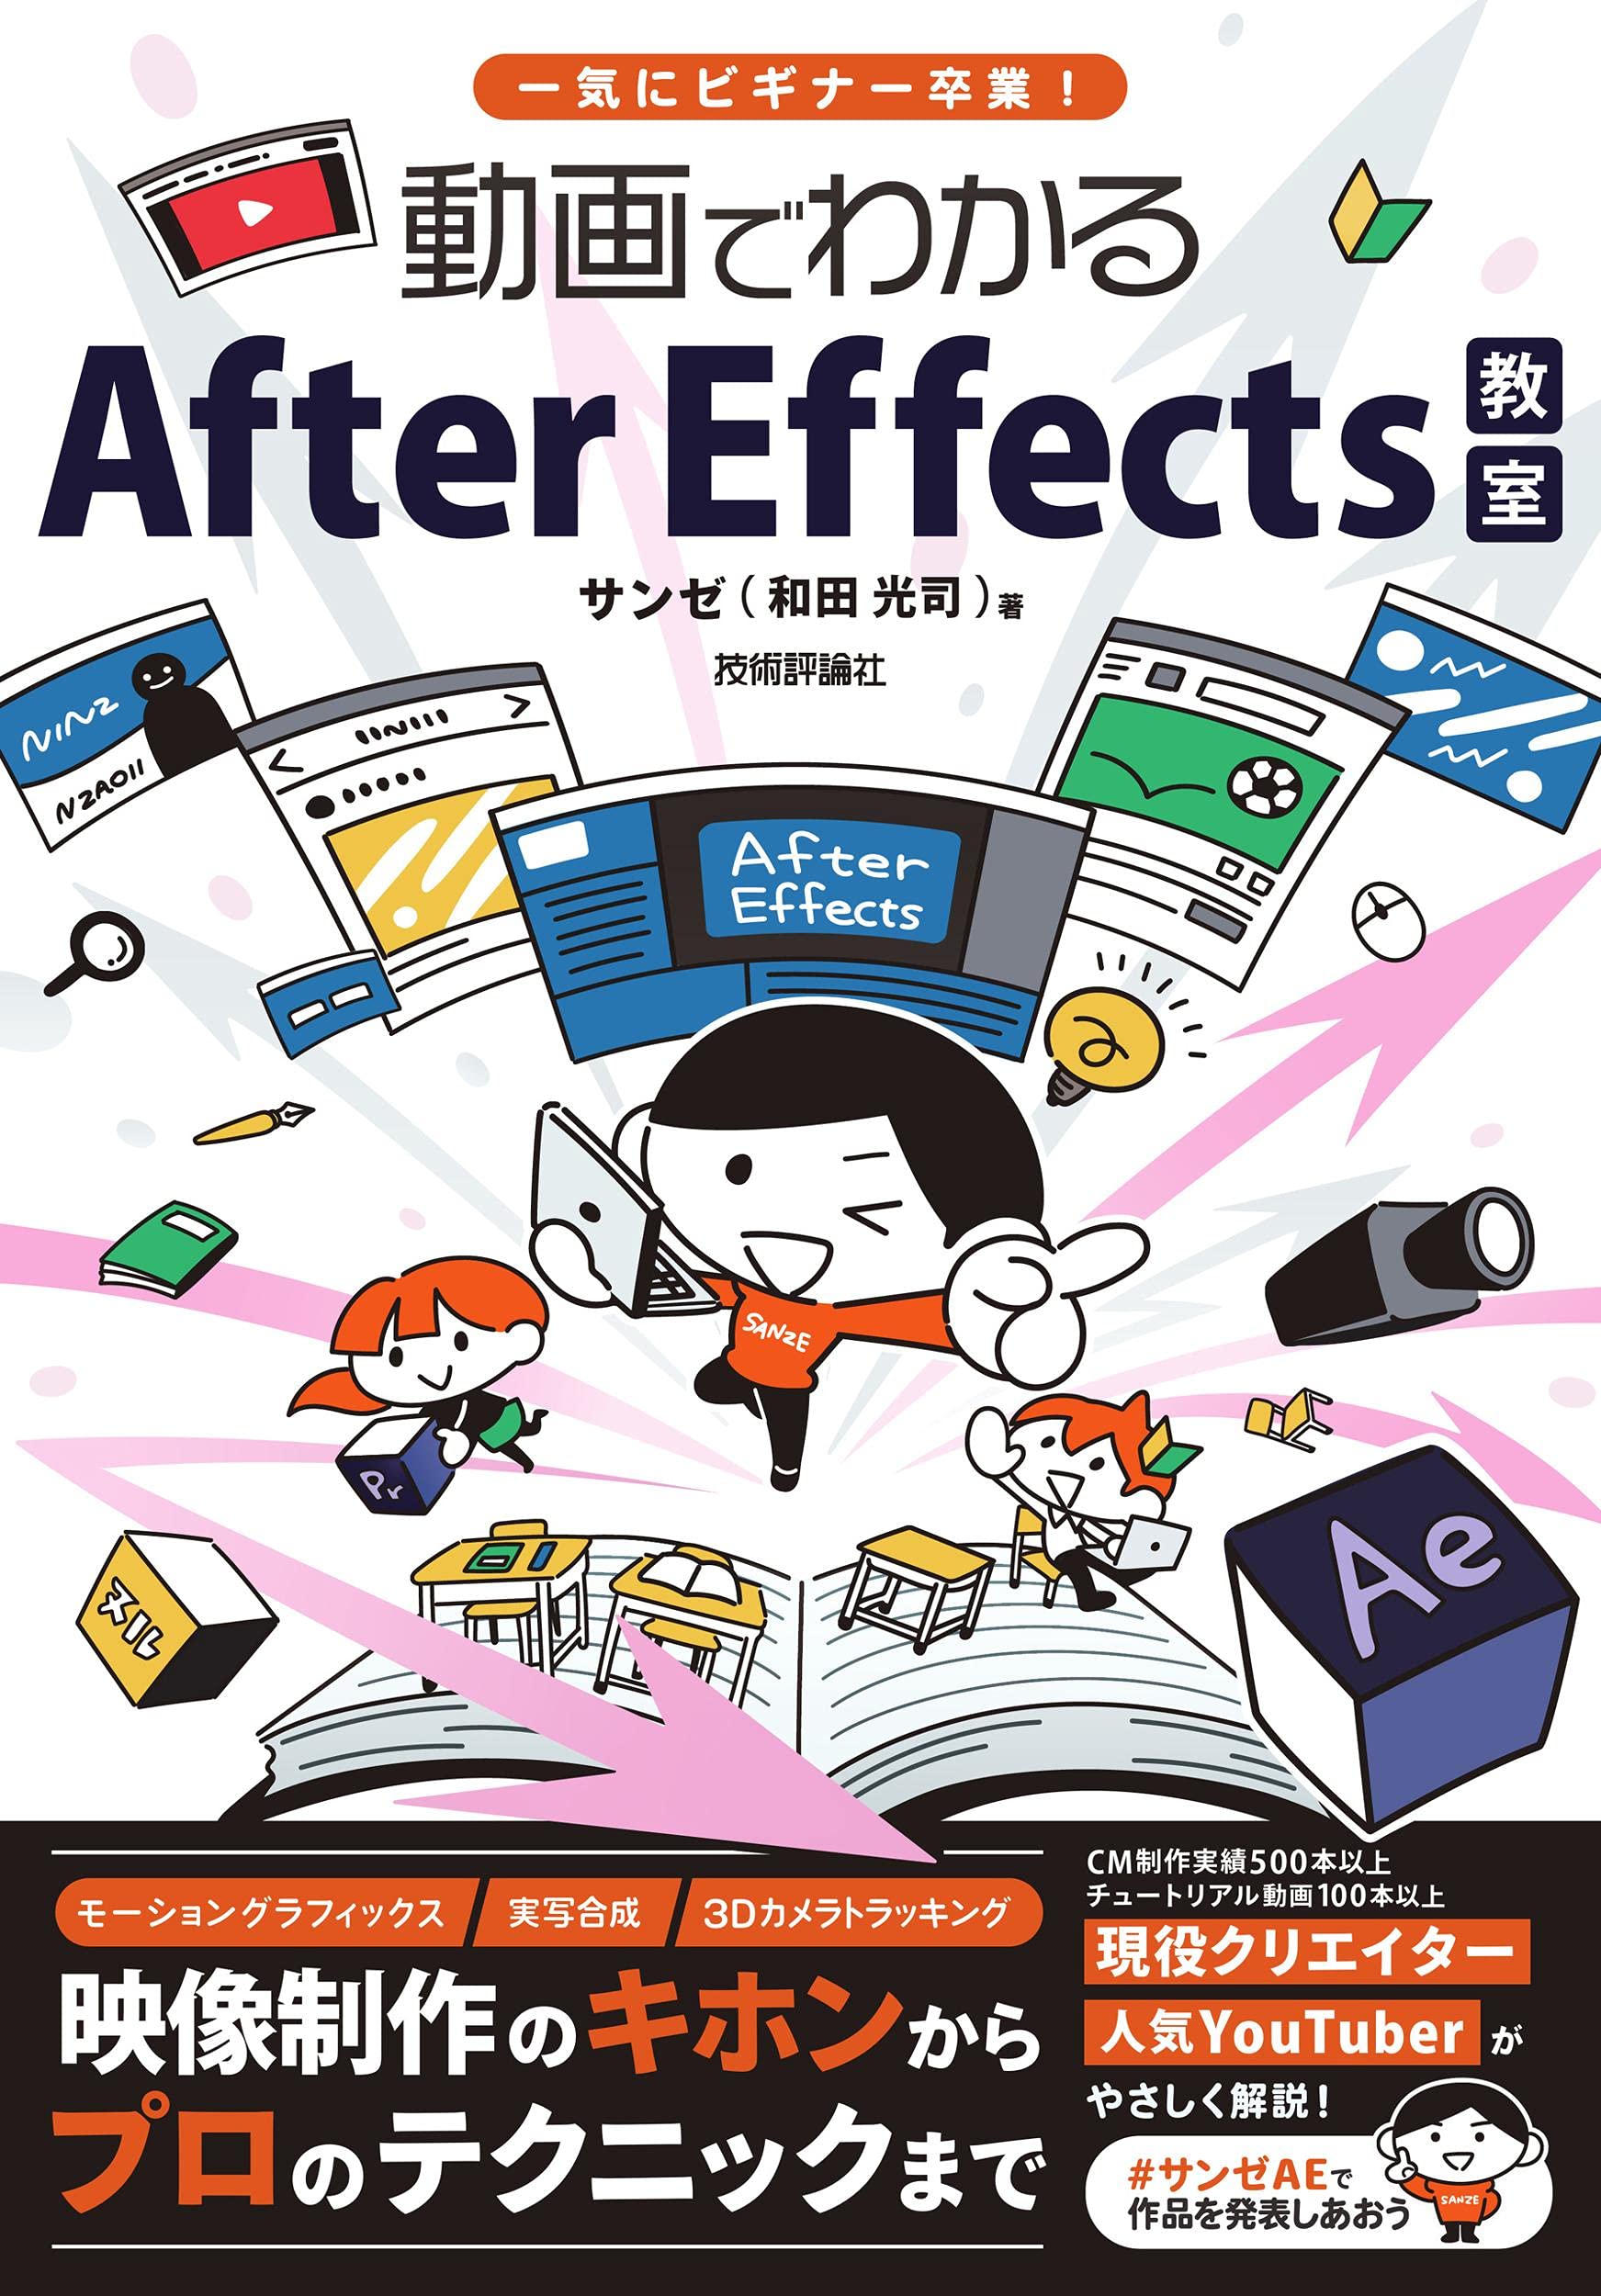 After Effects標準講座 STANDARD 40 LESSONS